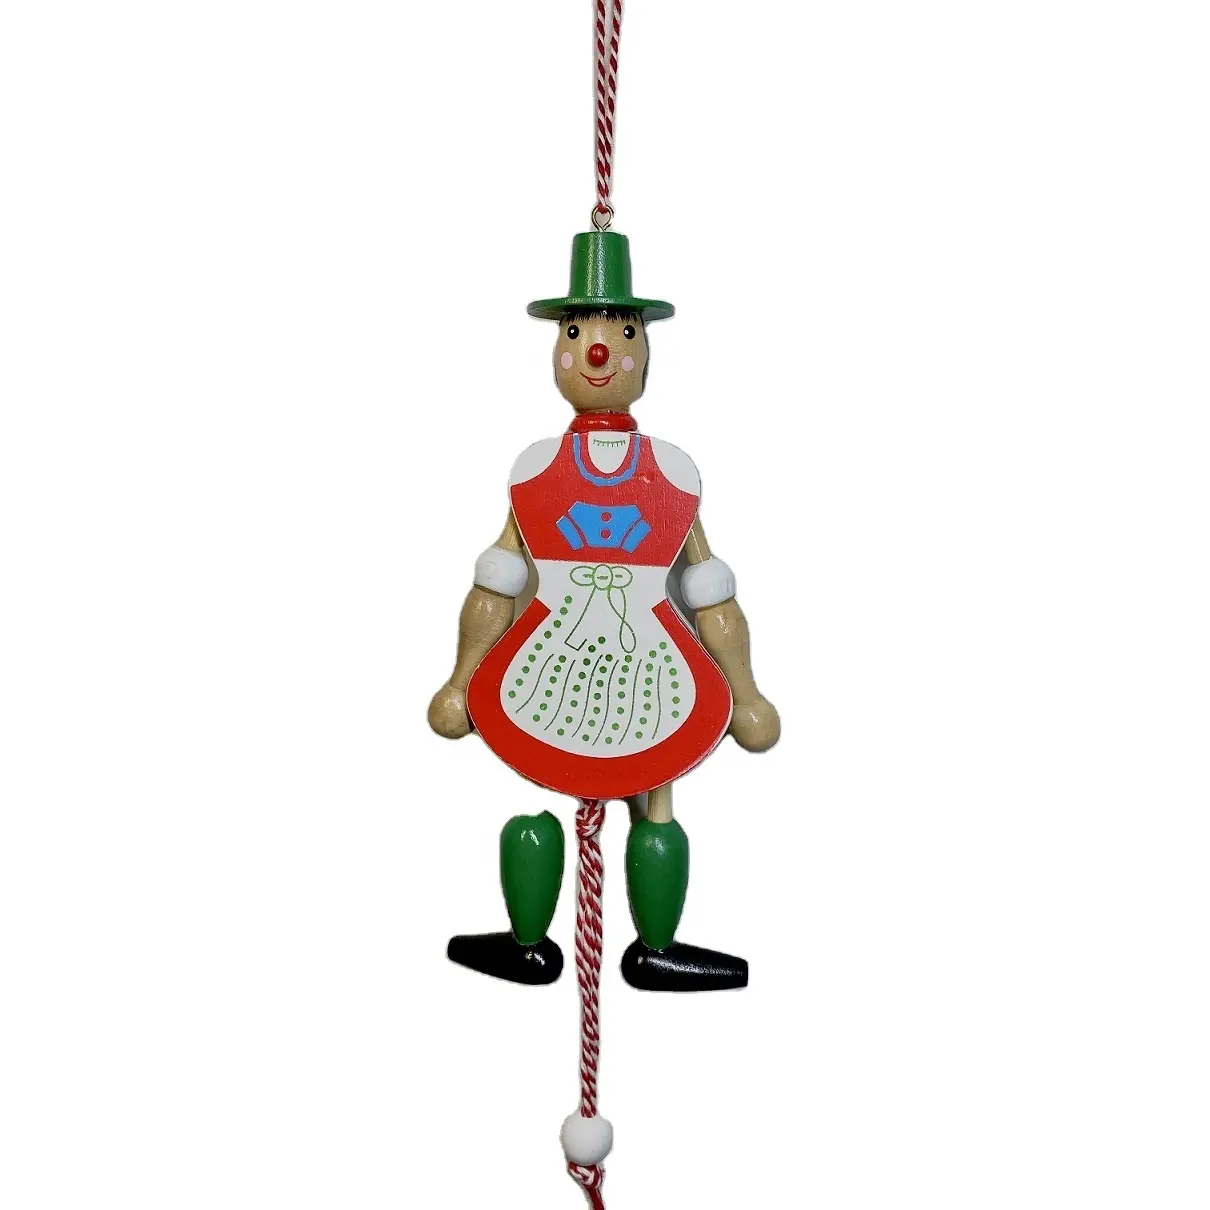 Wholesale Good Quality Wooden Handmade Pinocchio Marionette Push Puppet